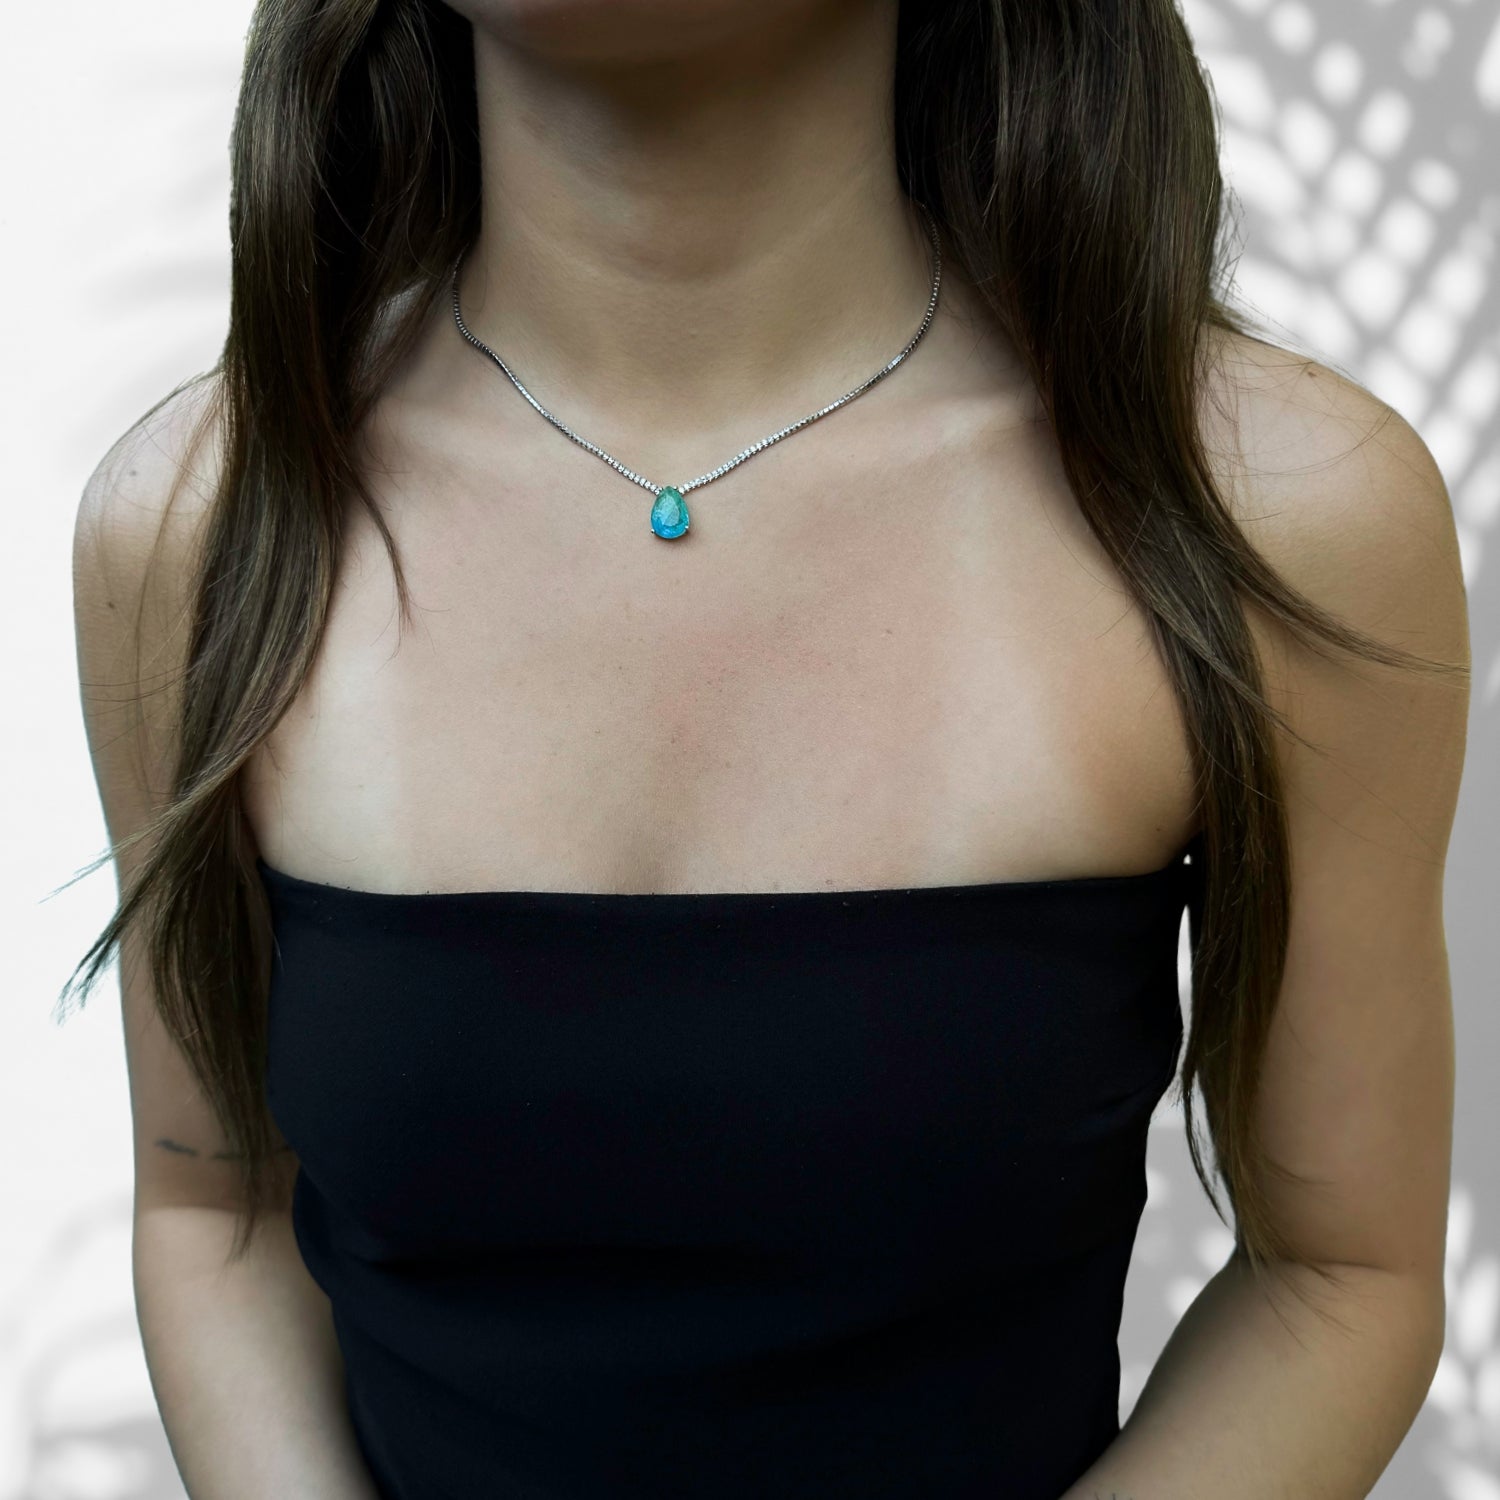 Model Wearing Rare and Vivid Beauty: Paraiba Tourmaline in Handcrafted Necklace